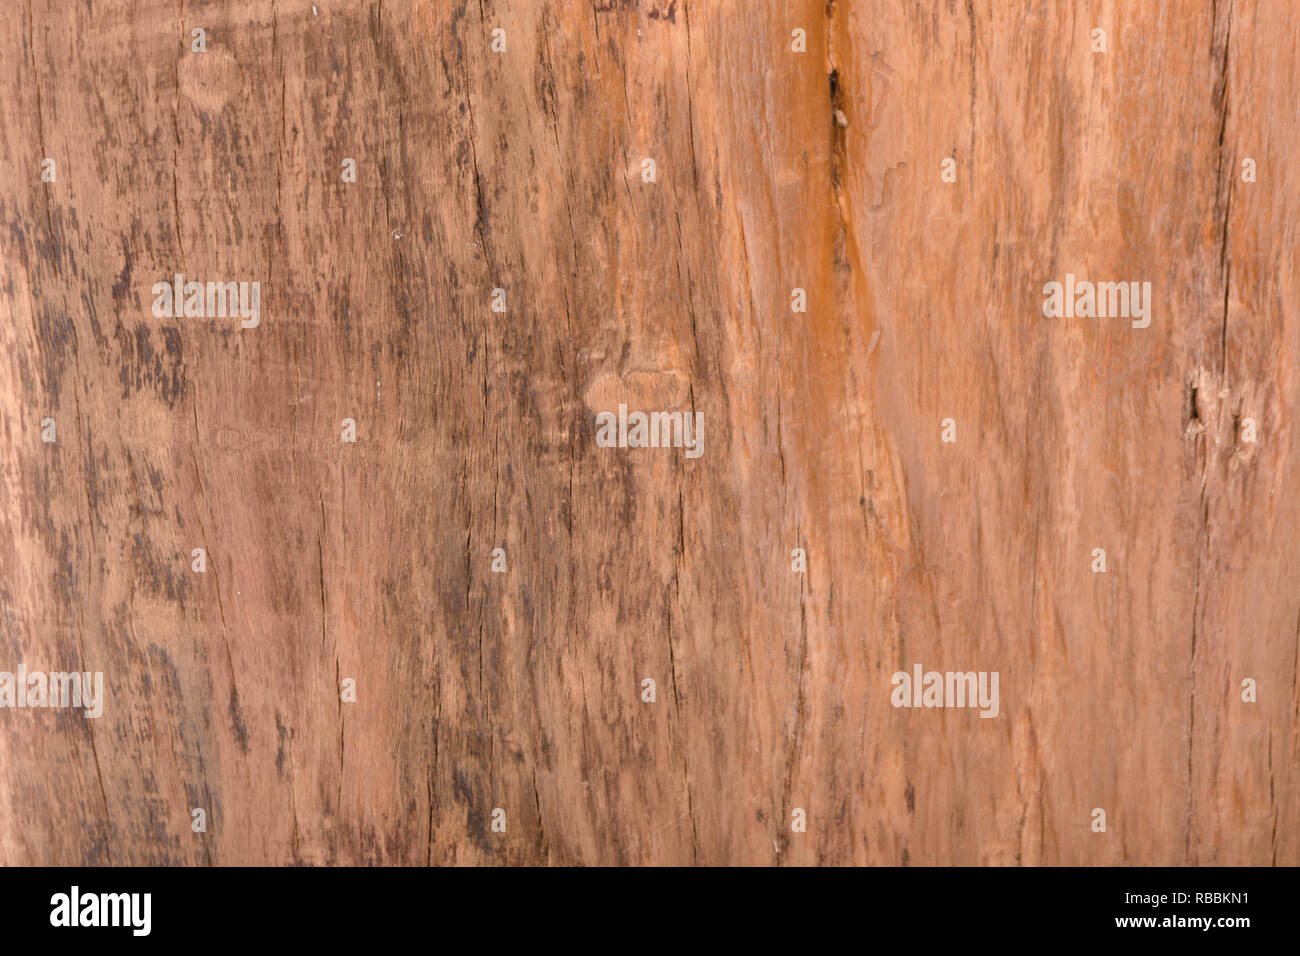 Wood texture. Wood texture for design and decoration. texture of wood use as natural background - Imagem Stock Photo